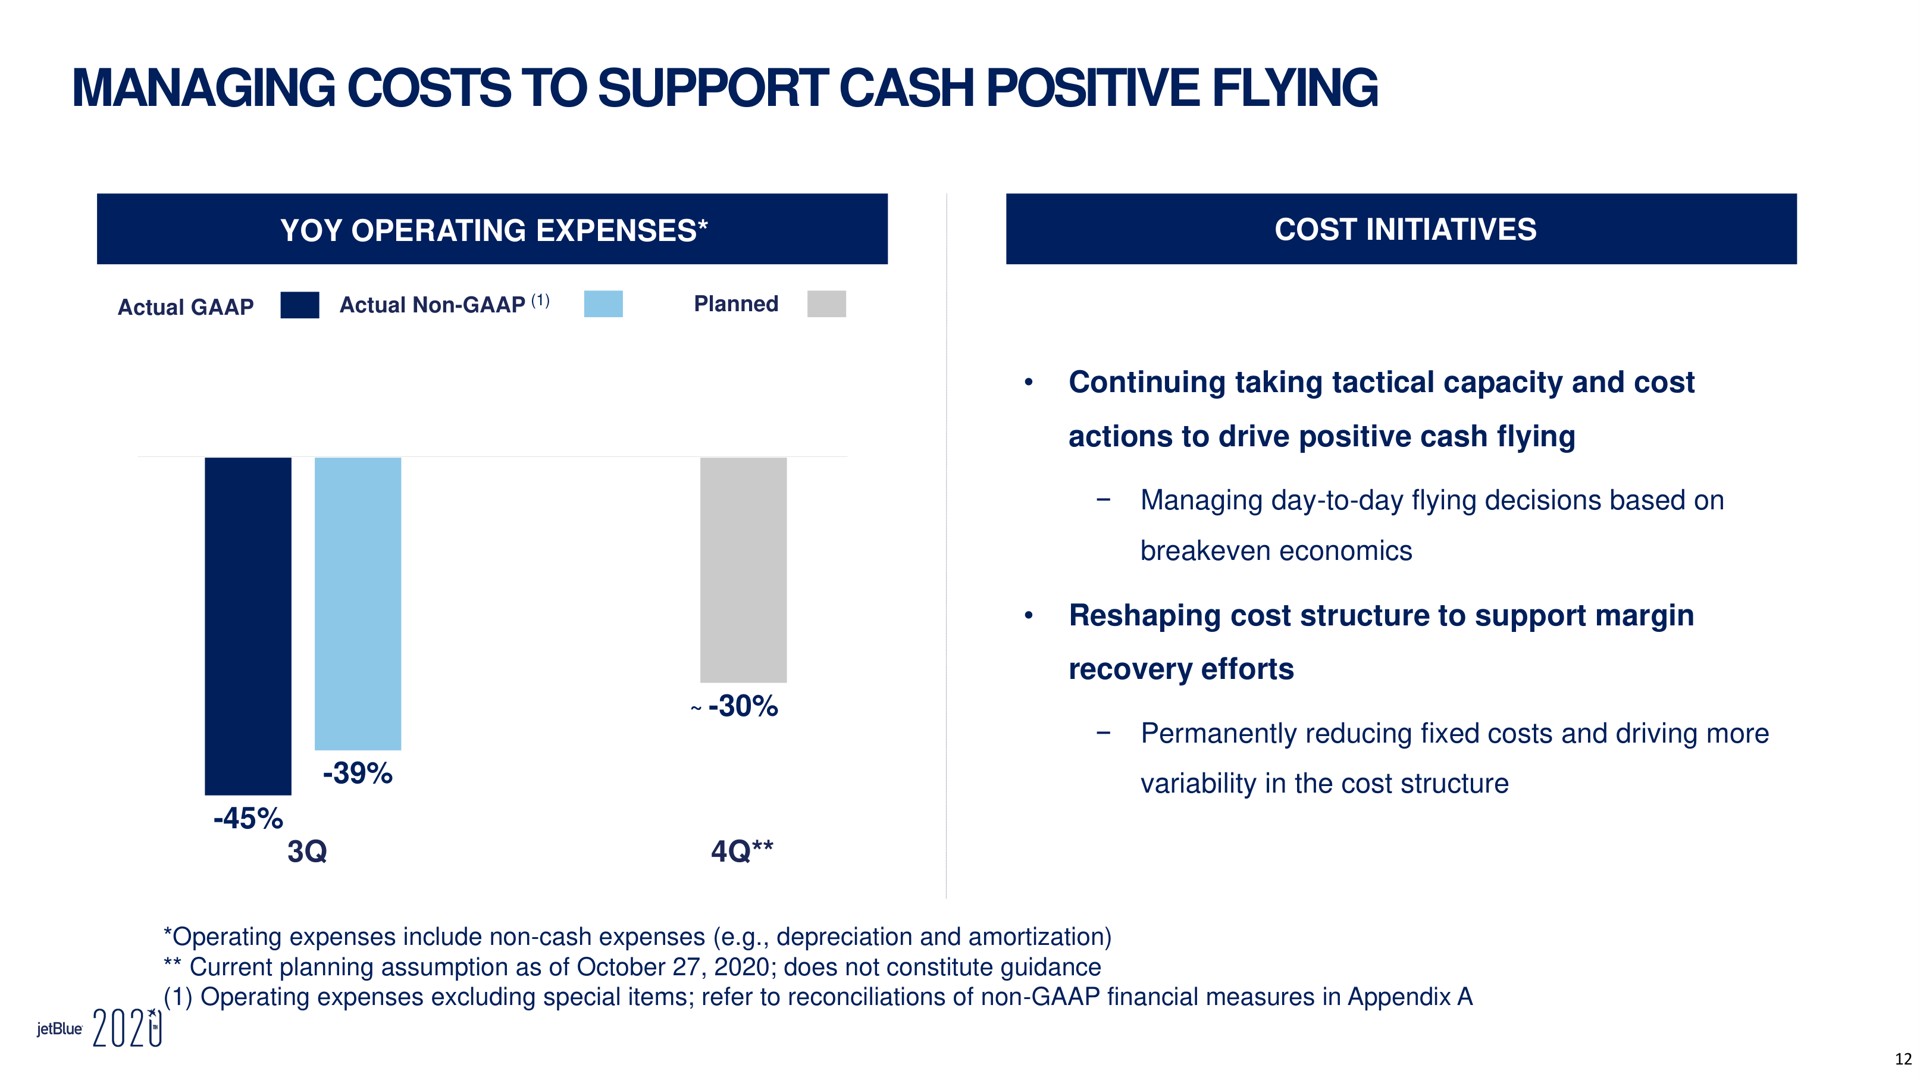 managing costs to support cash positive flying yoy operating expenses cost initiatives continuing taking tactical capacity and cost actions to drive positive cash flying reshaping cost structure to support margin recovery efforts | jetBlue